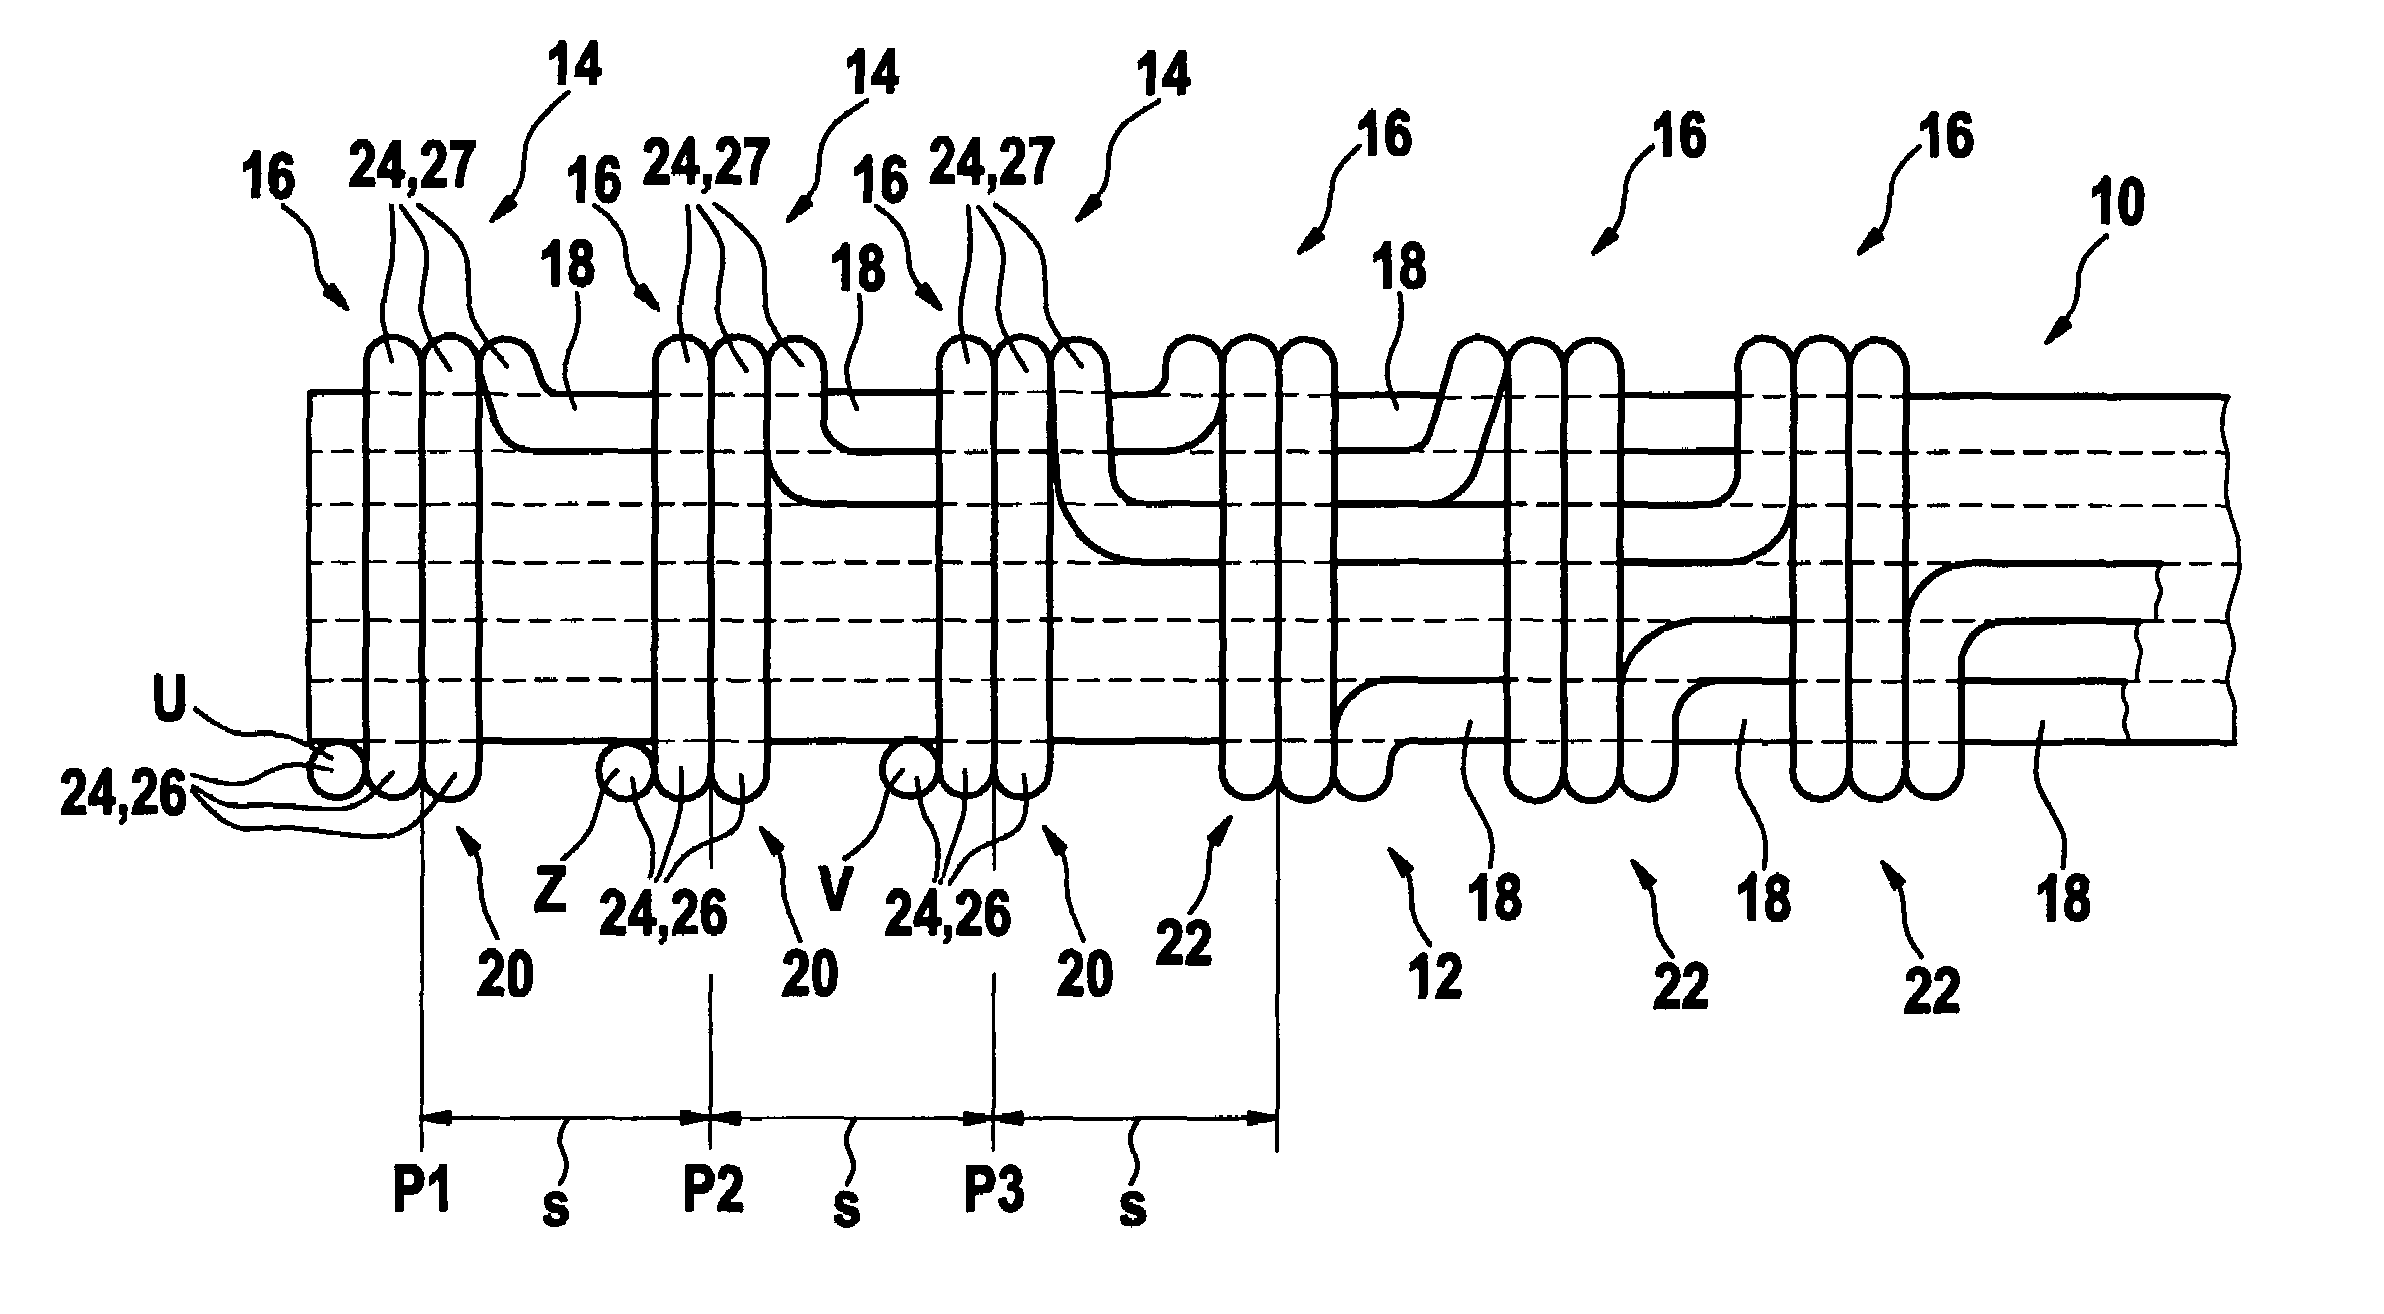 Method of making a two-layer lap winding for a multiphase electrical machine